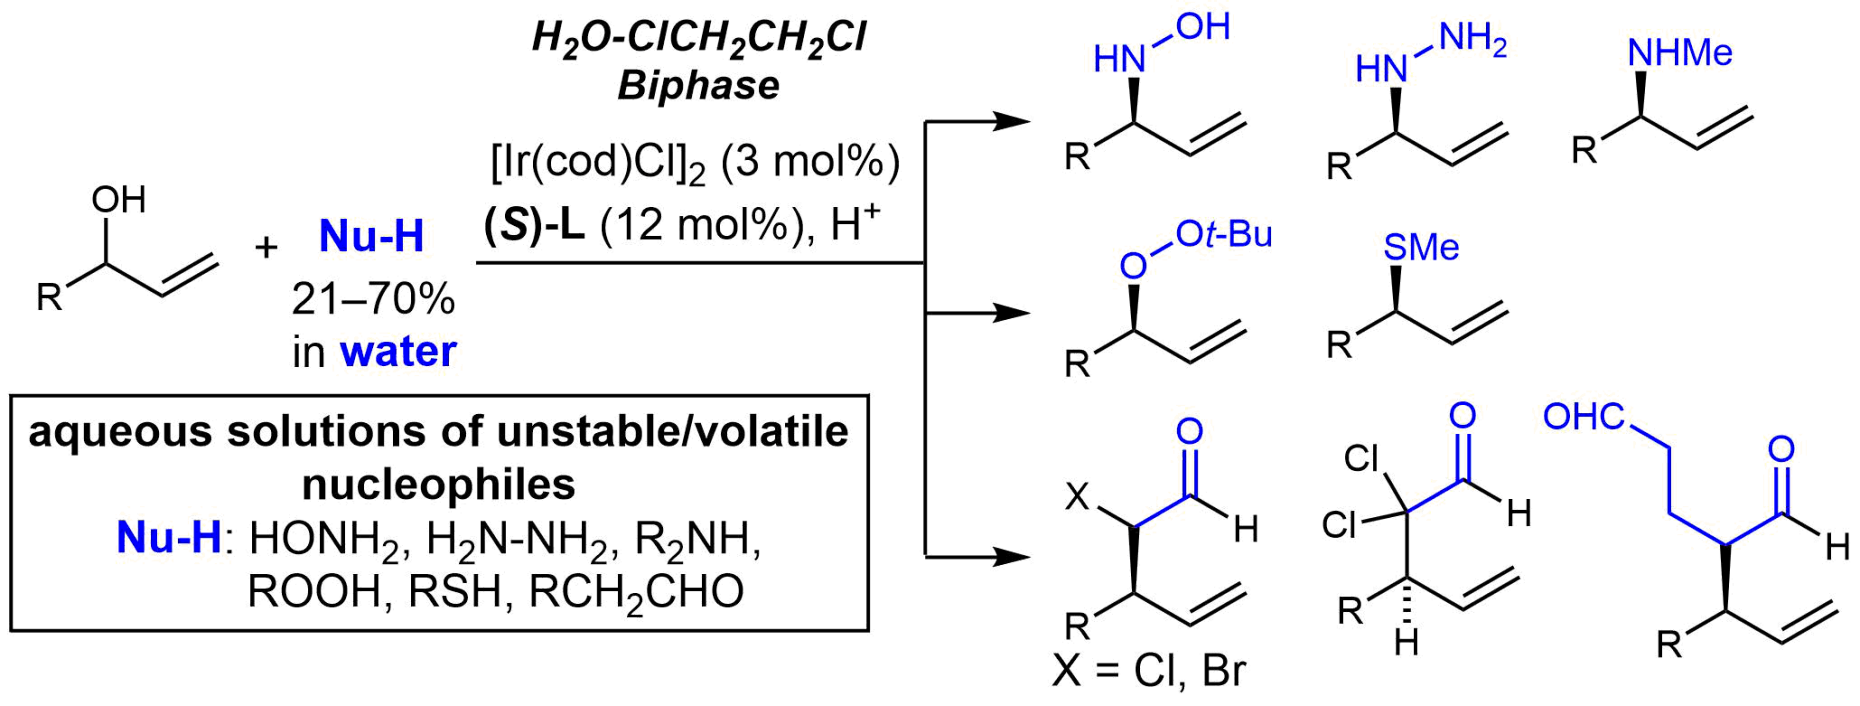 Iridium-Catalyzed Enantioselective Allylic Substitution with Aqueous Solutions of Nucleophiles